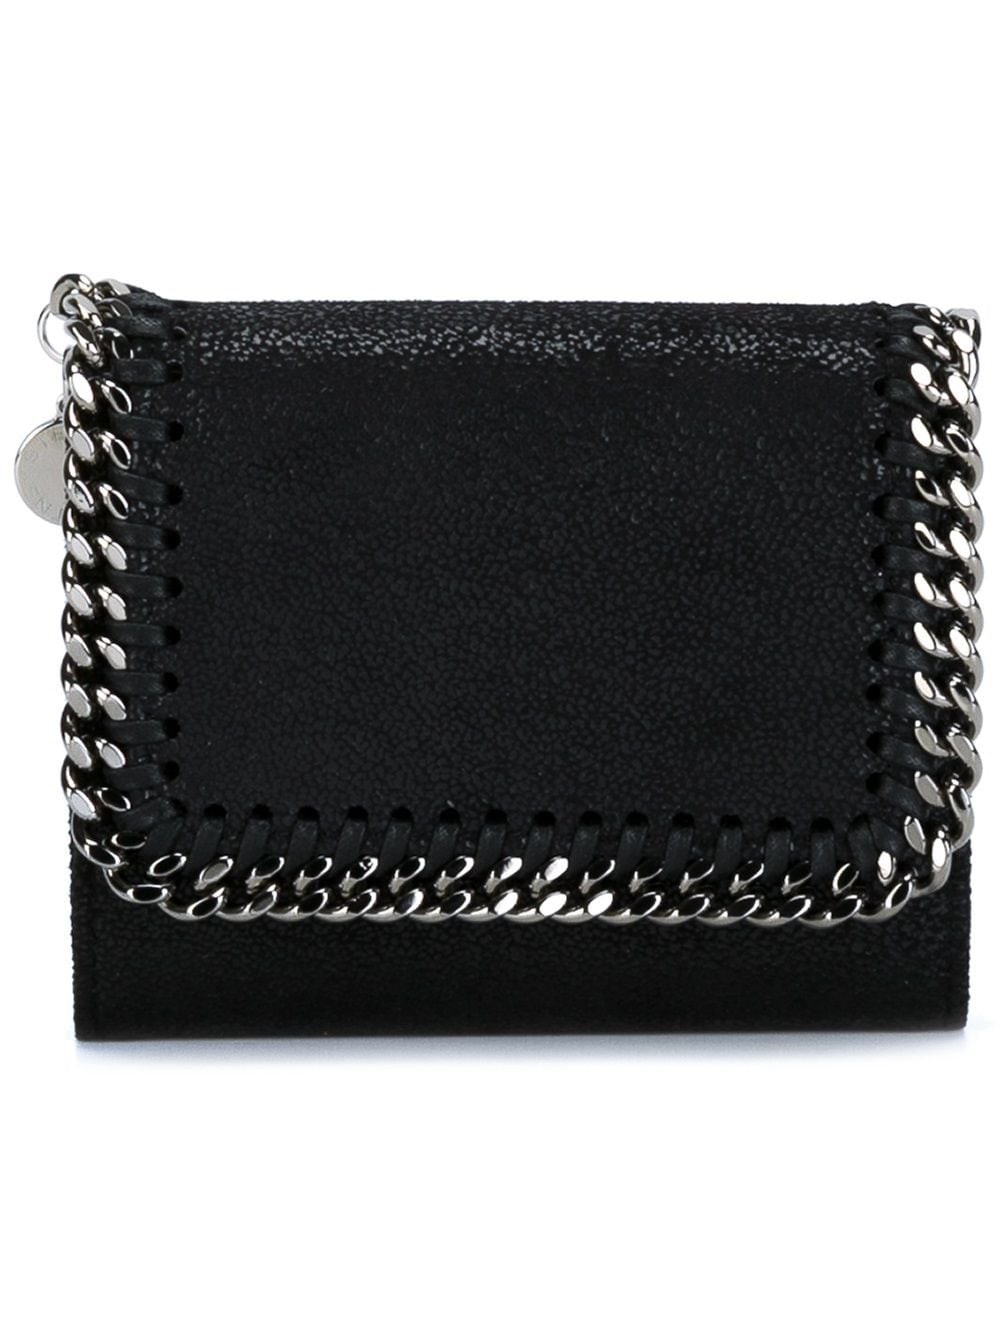 Stella Mccartney Falabella Wallet With Flap In Black